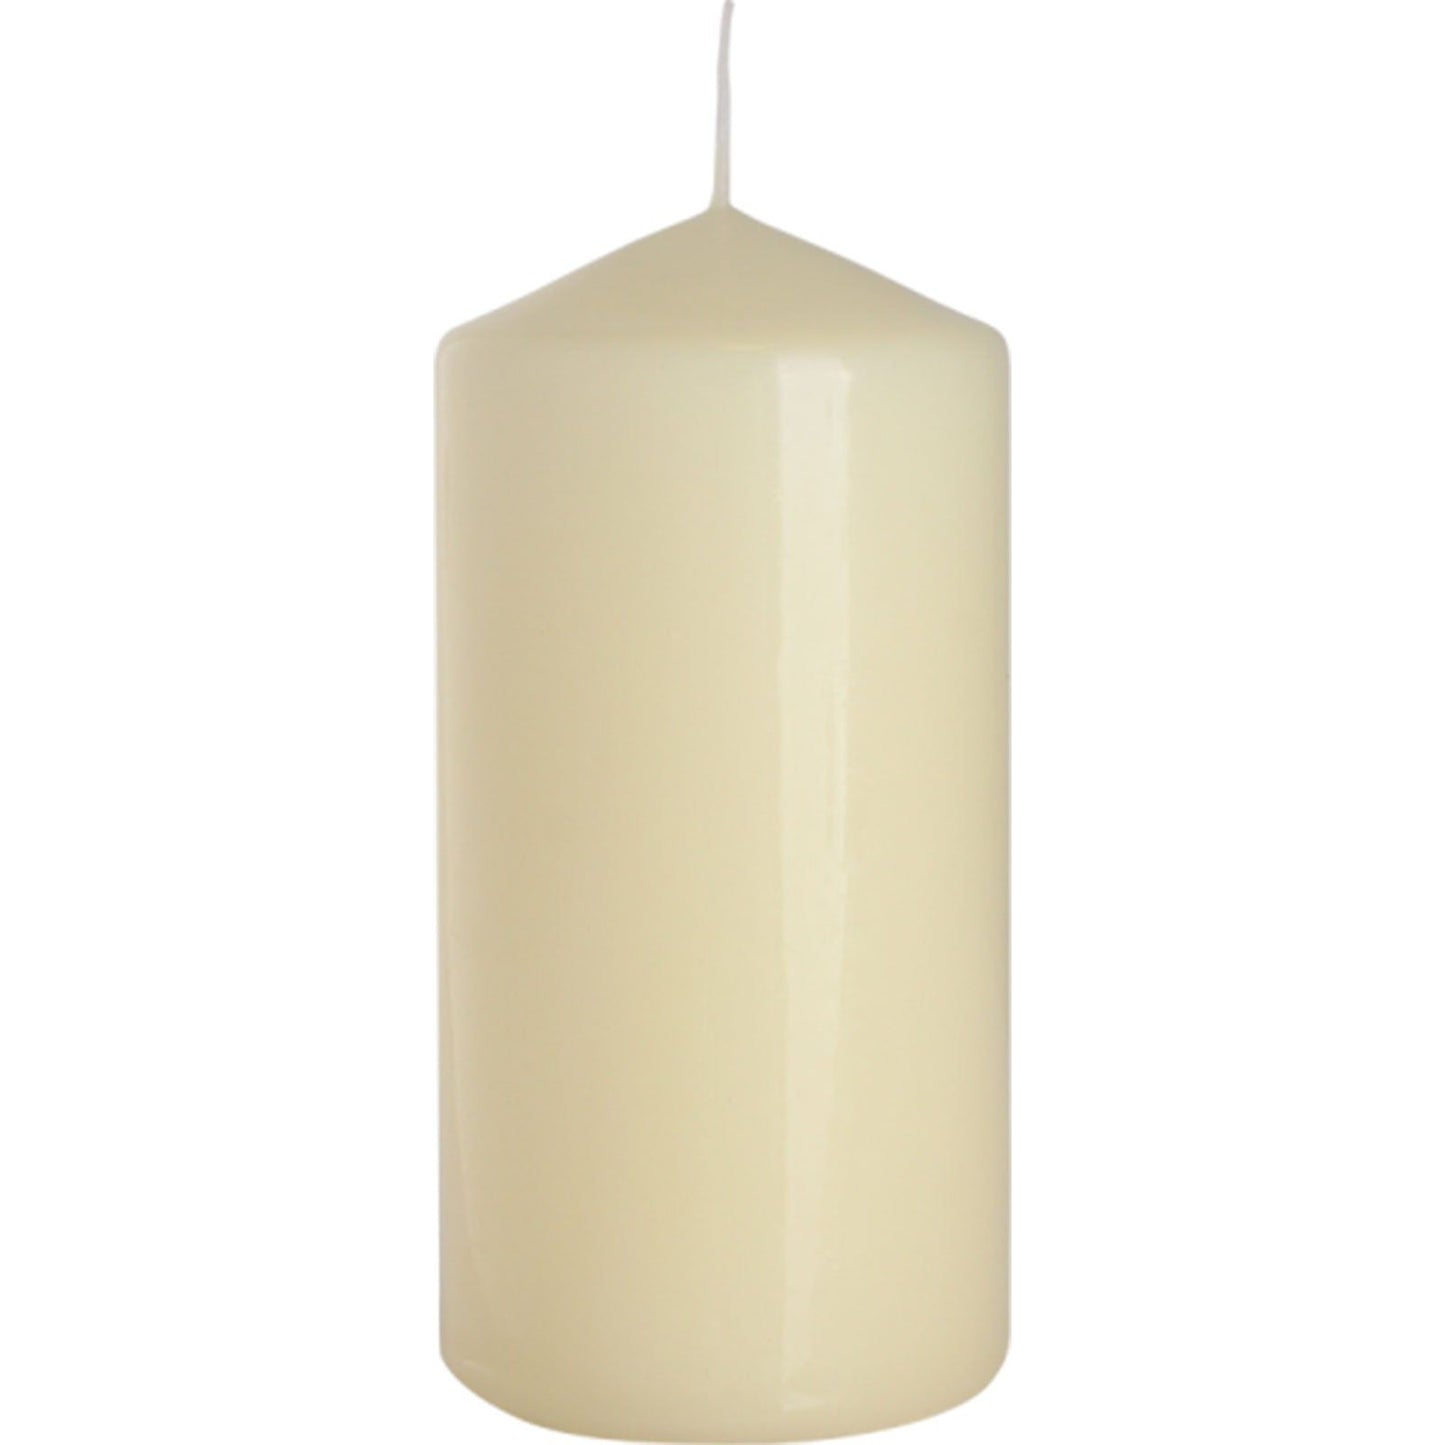 Pillar Candle 60x120mm - Ivory - Ashton and Finch